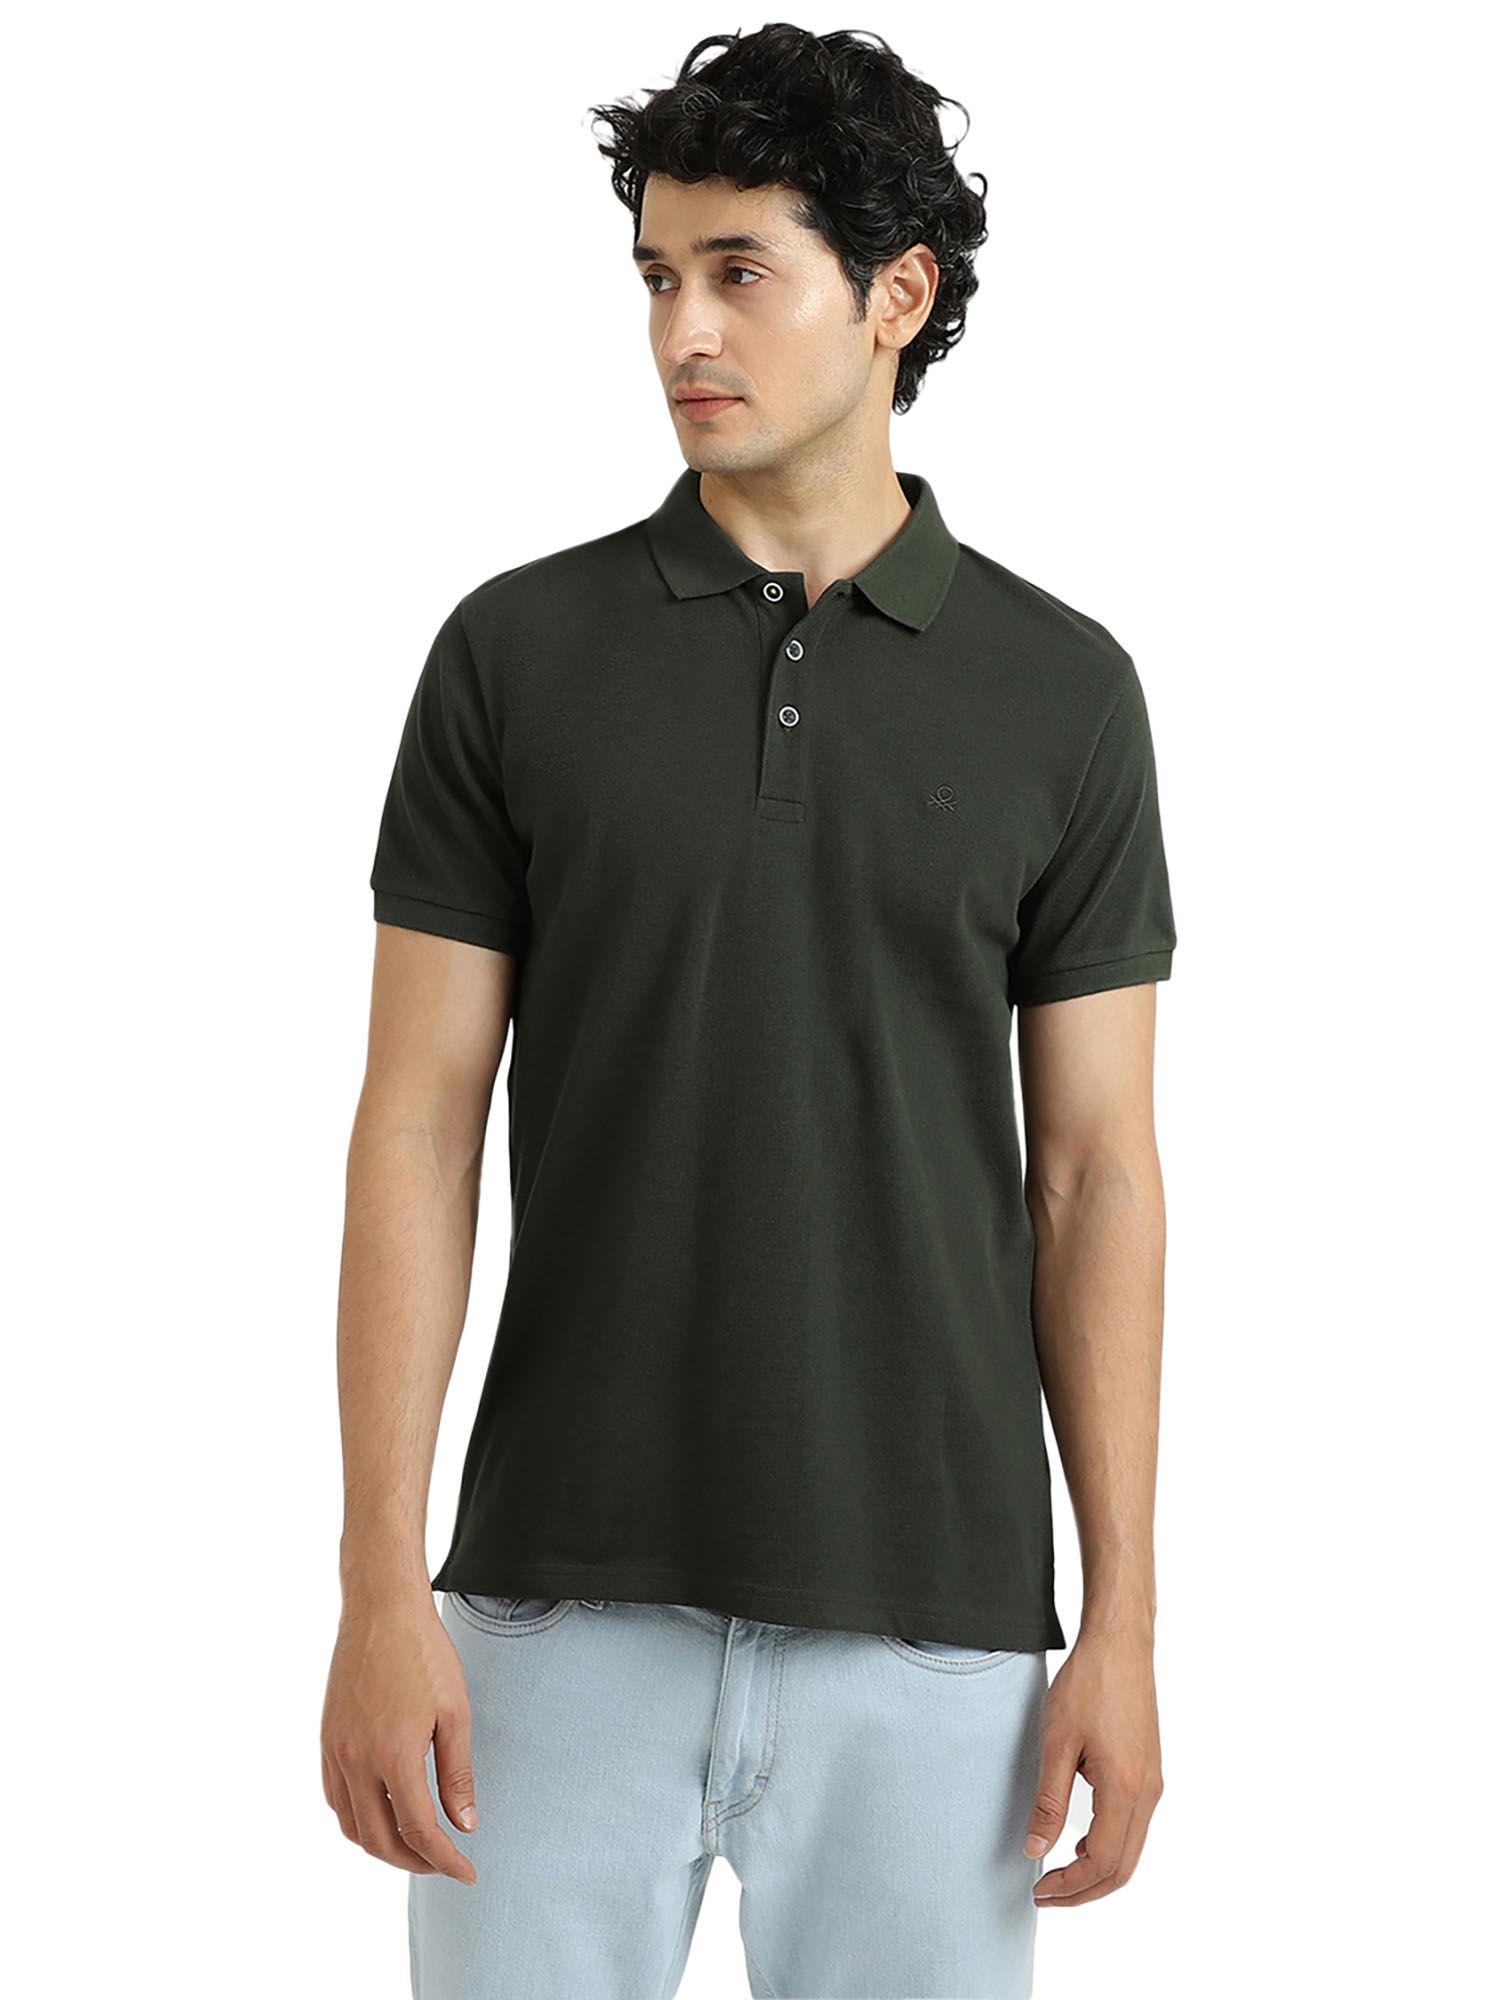 solid olive polo t-shirt